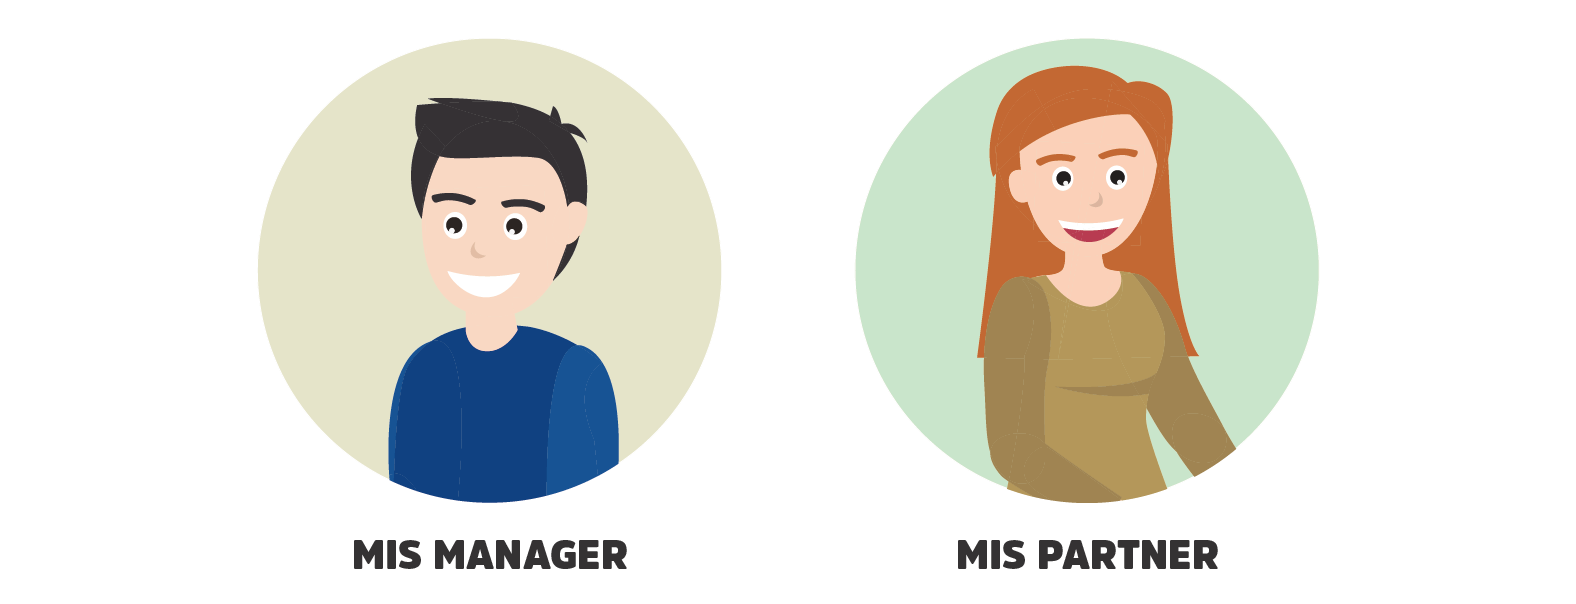 MIS-manager-and-MIS-partner